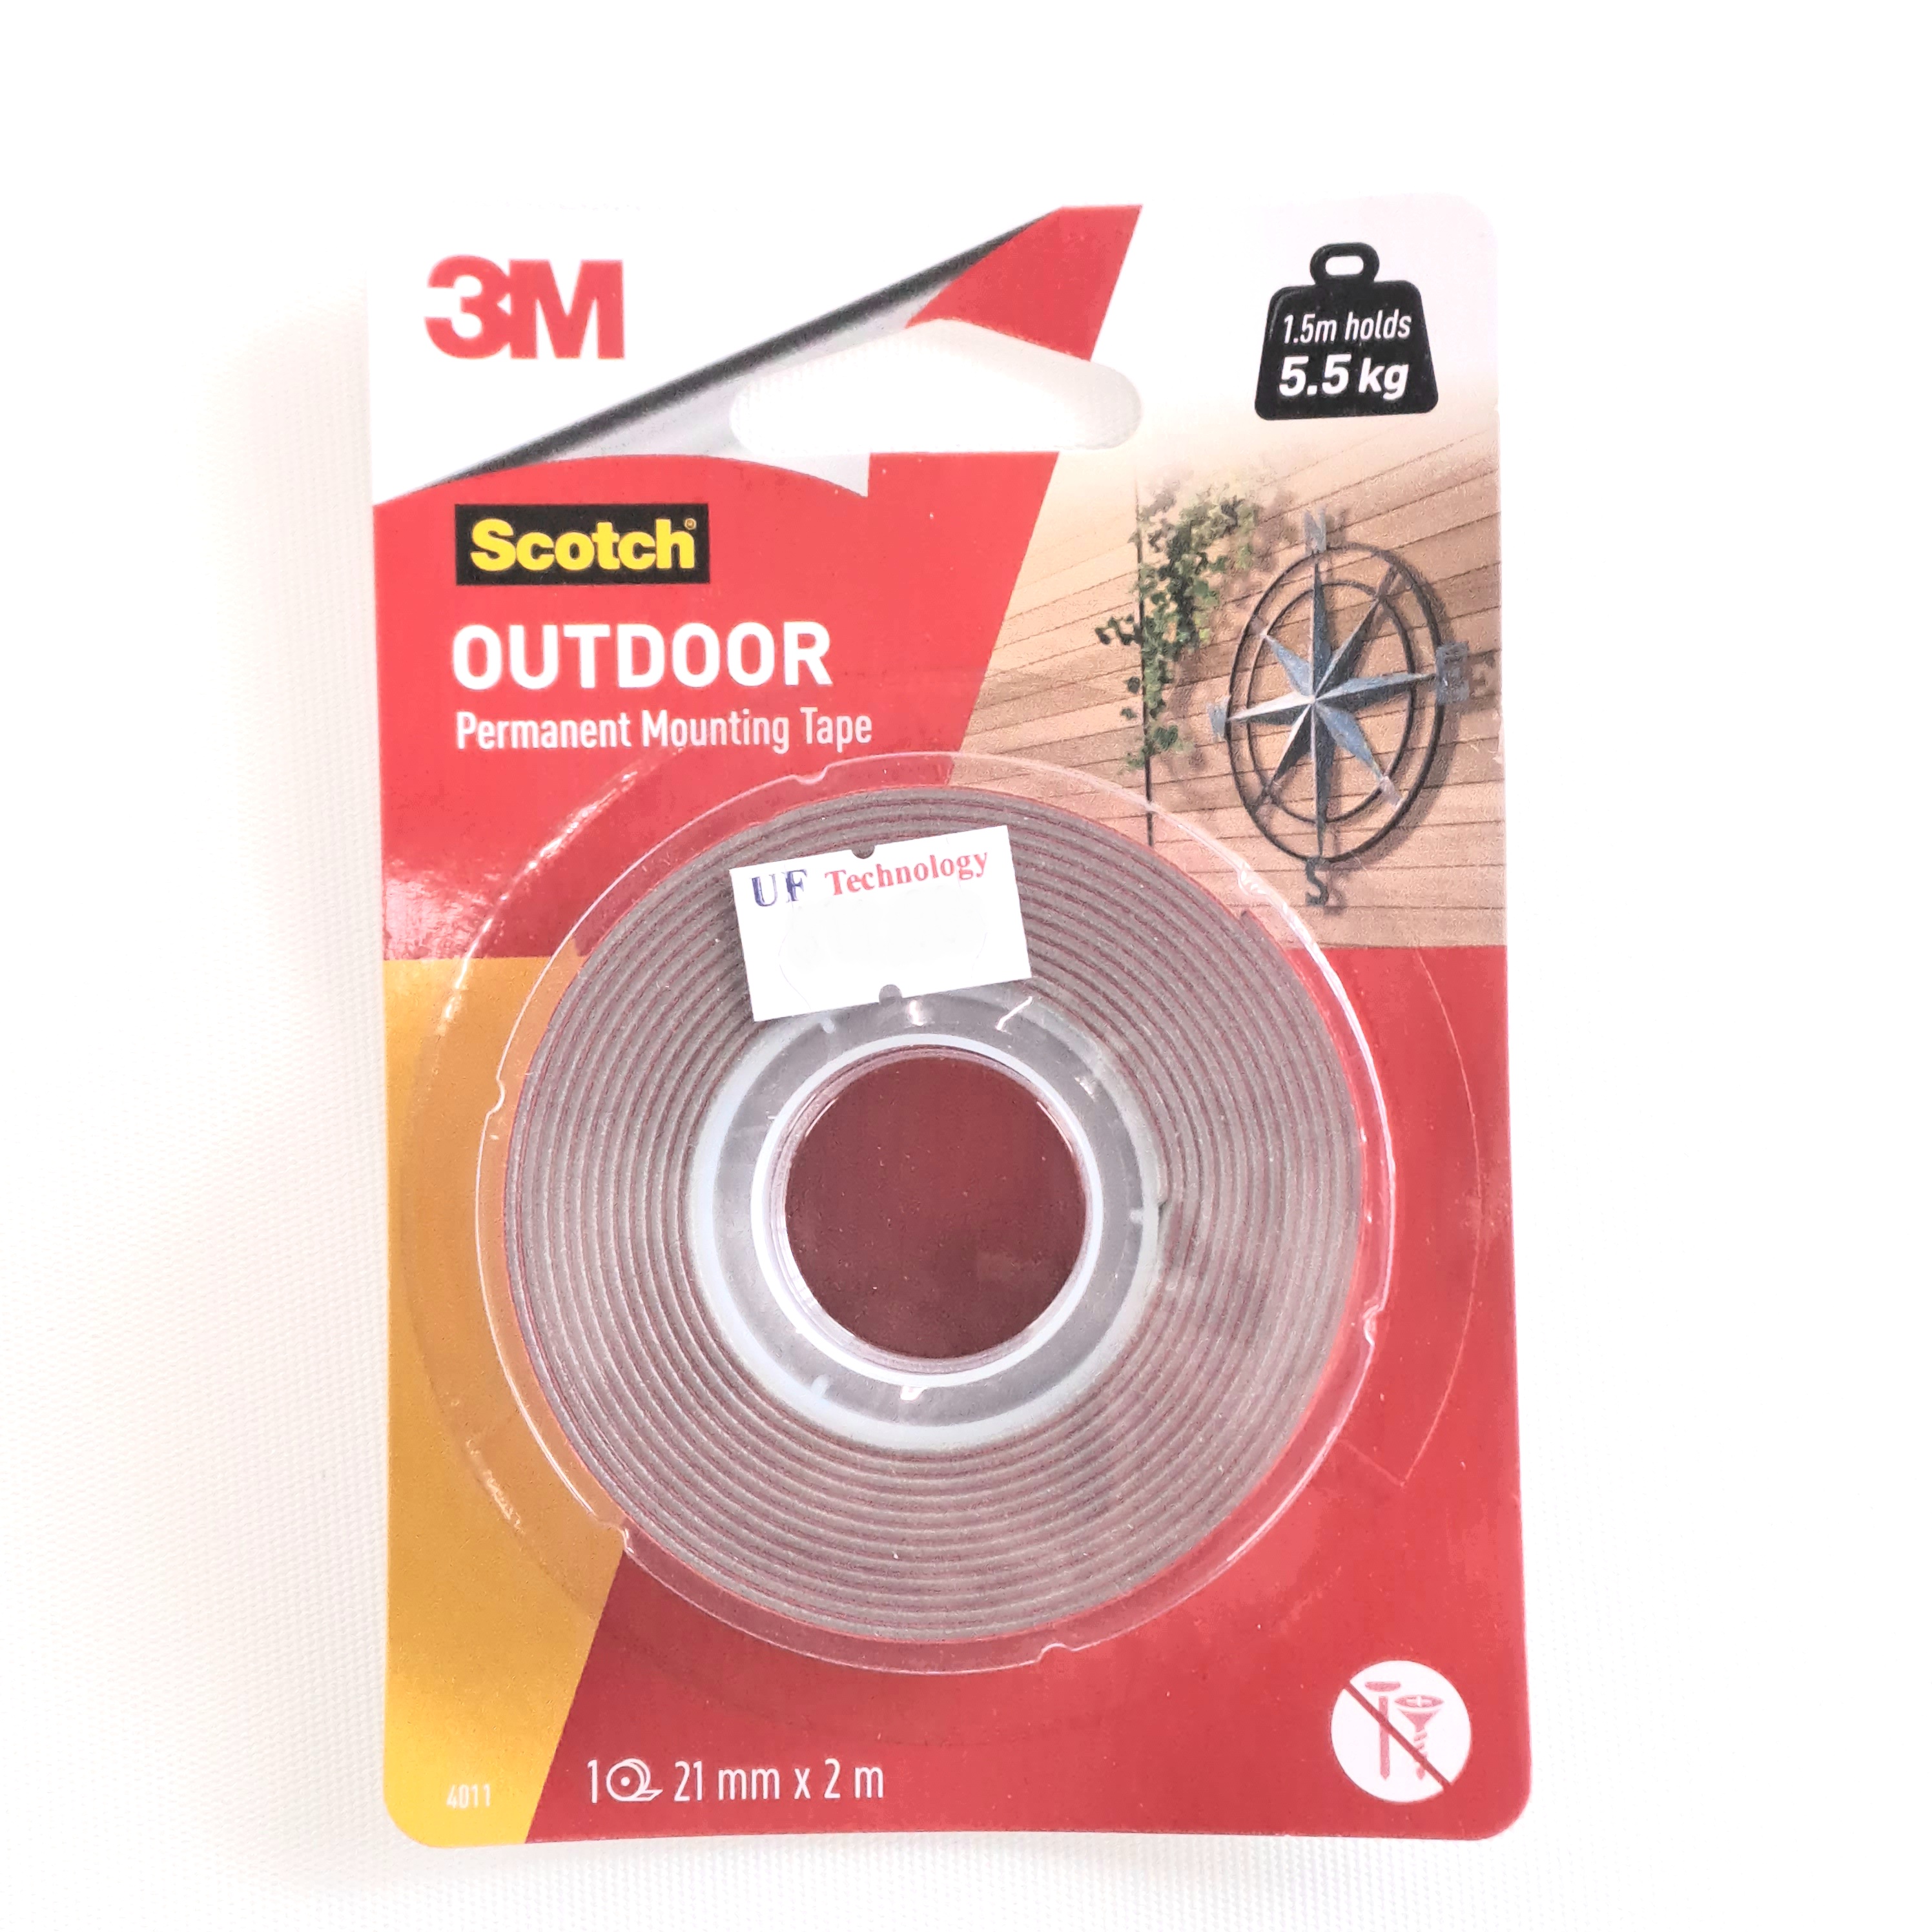 3M Scotch Outdoor Mounting Tape Cat 4011 21mm x 2m (7690)